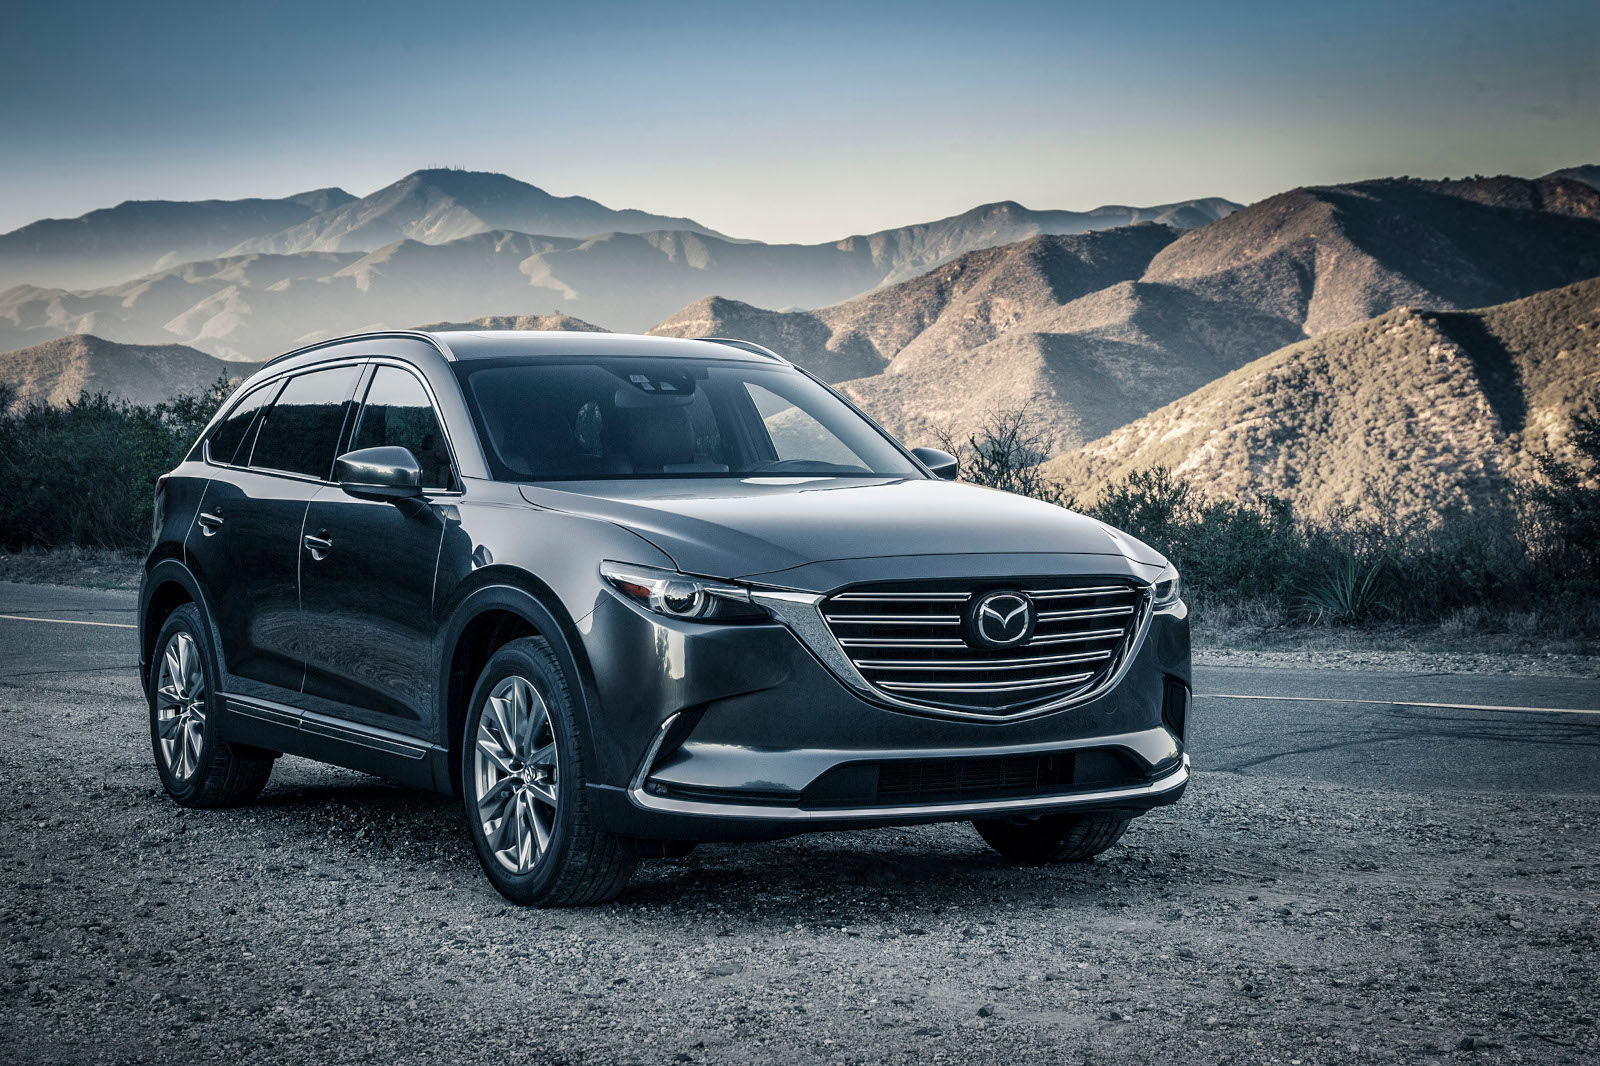 Why Buy a Pre-Owned Mazda CX-9?